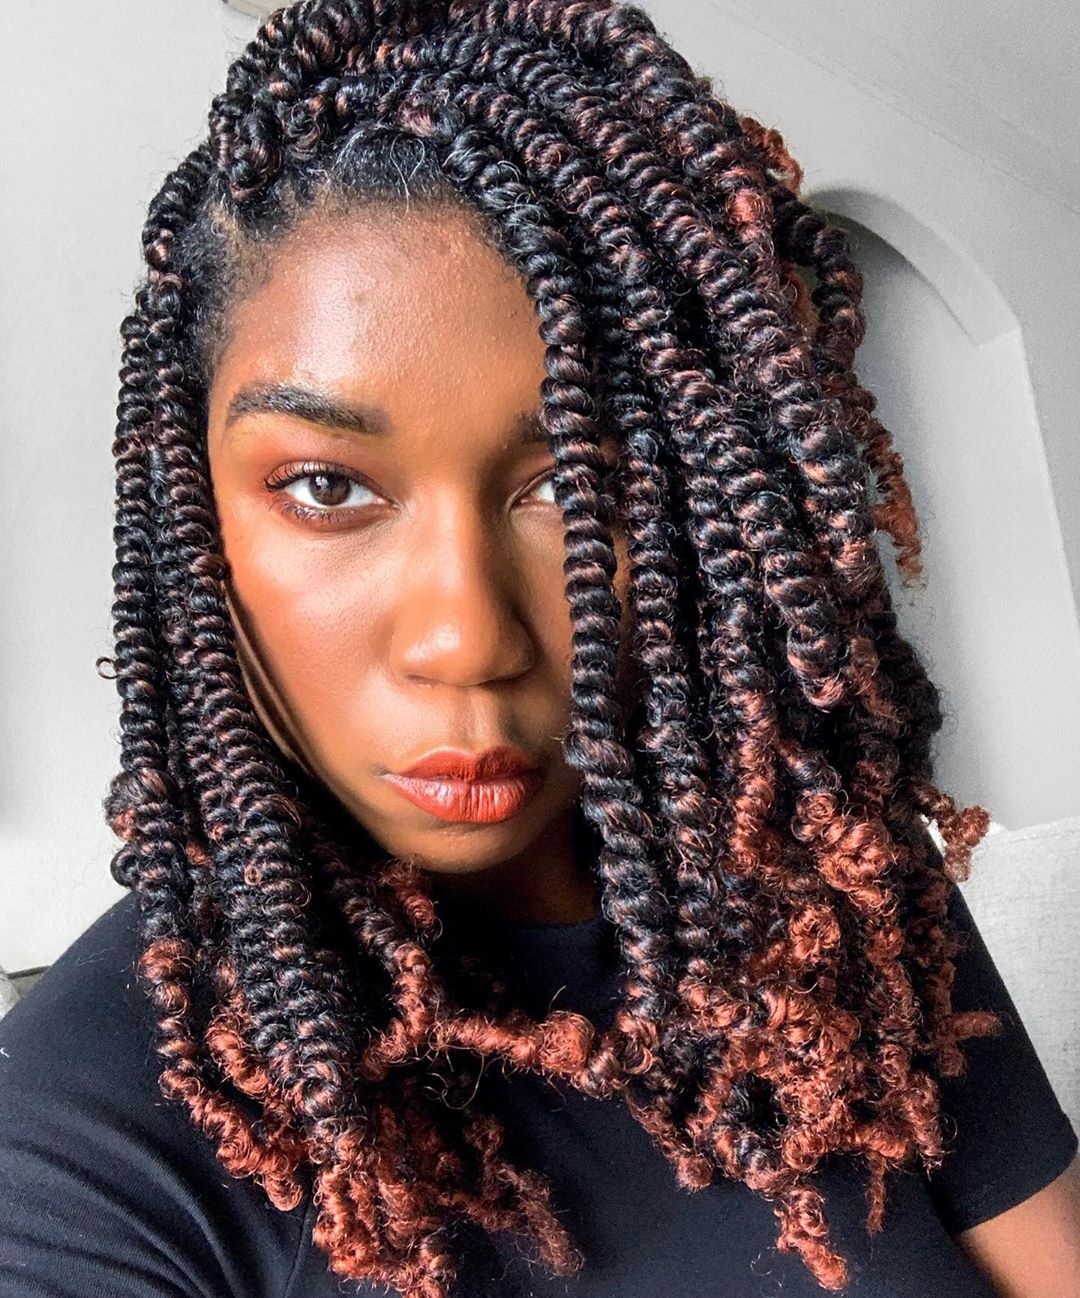 Fulani Braids Are The Fire Protective Style Celebrities Can't Get